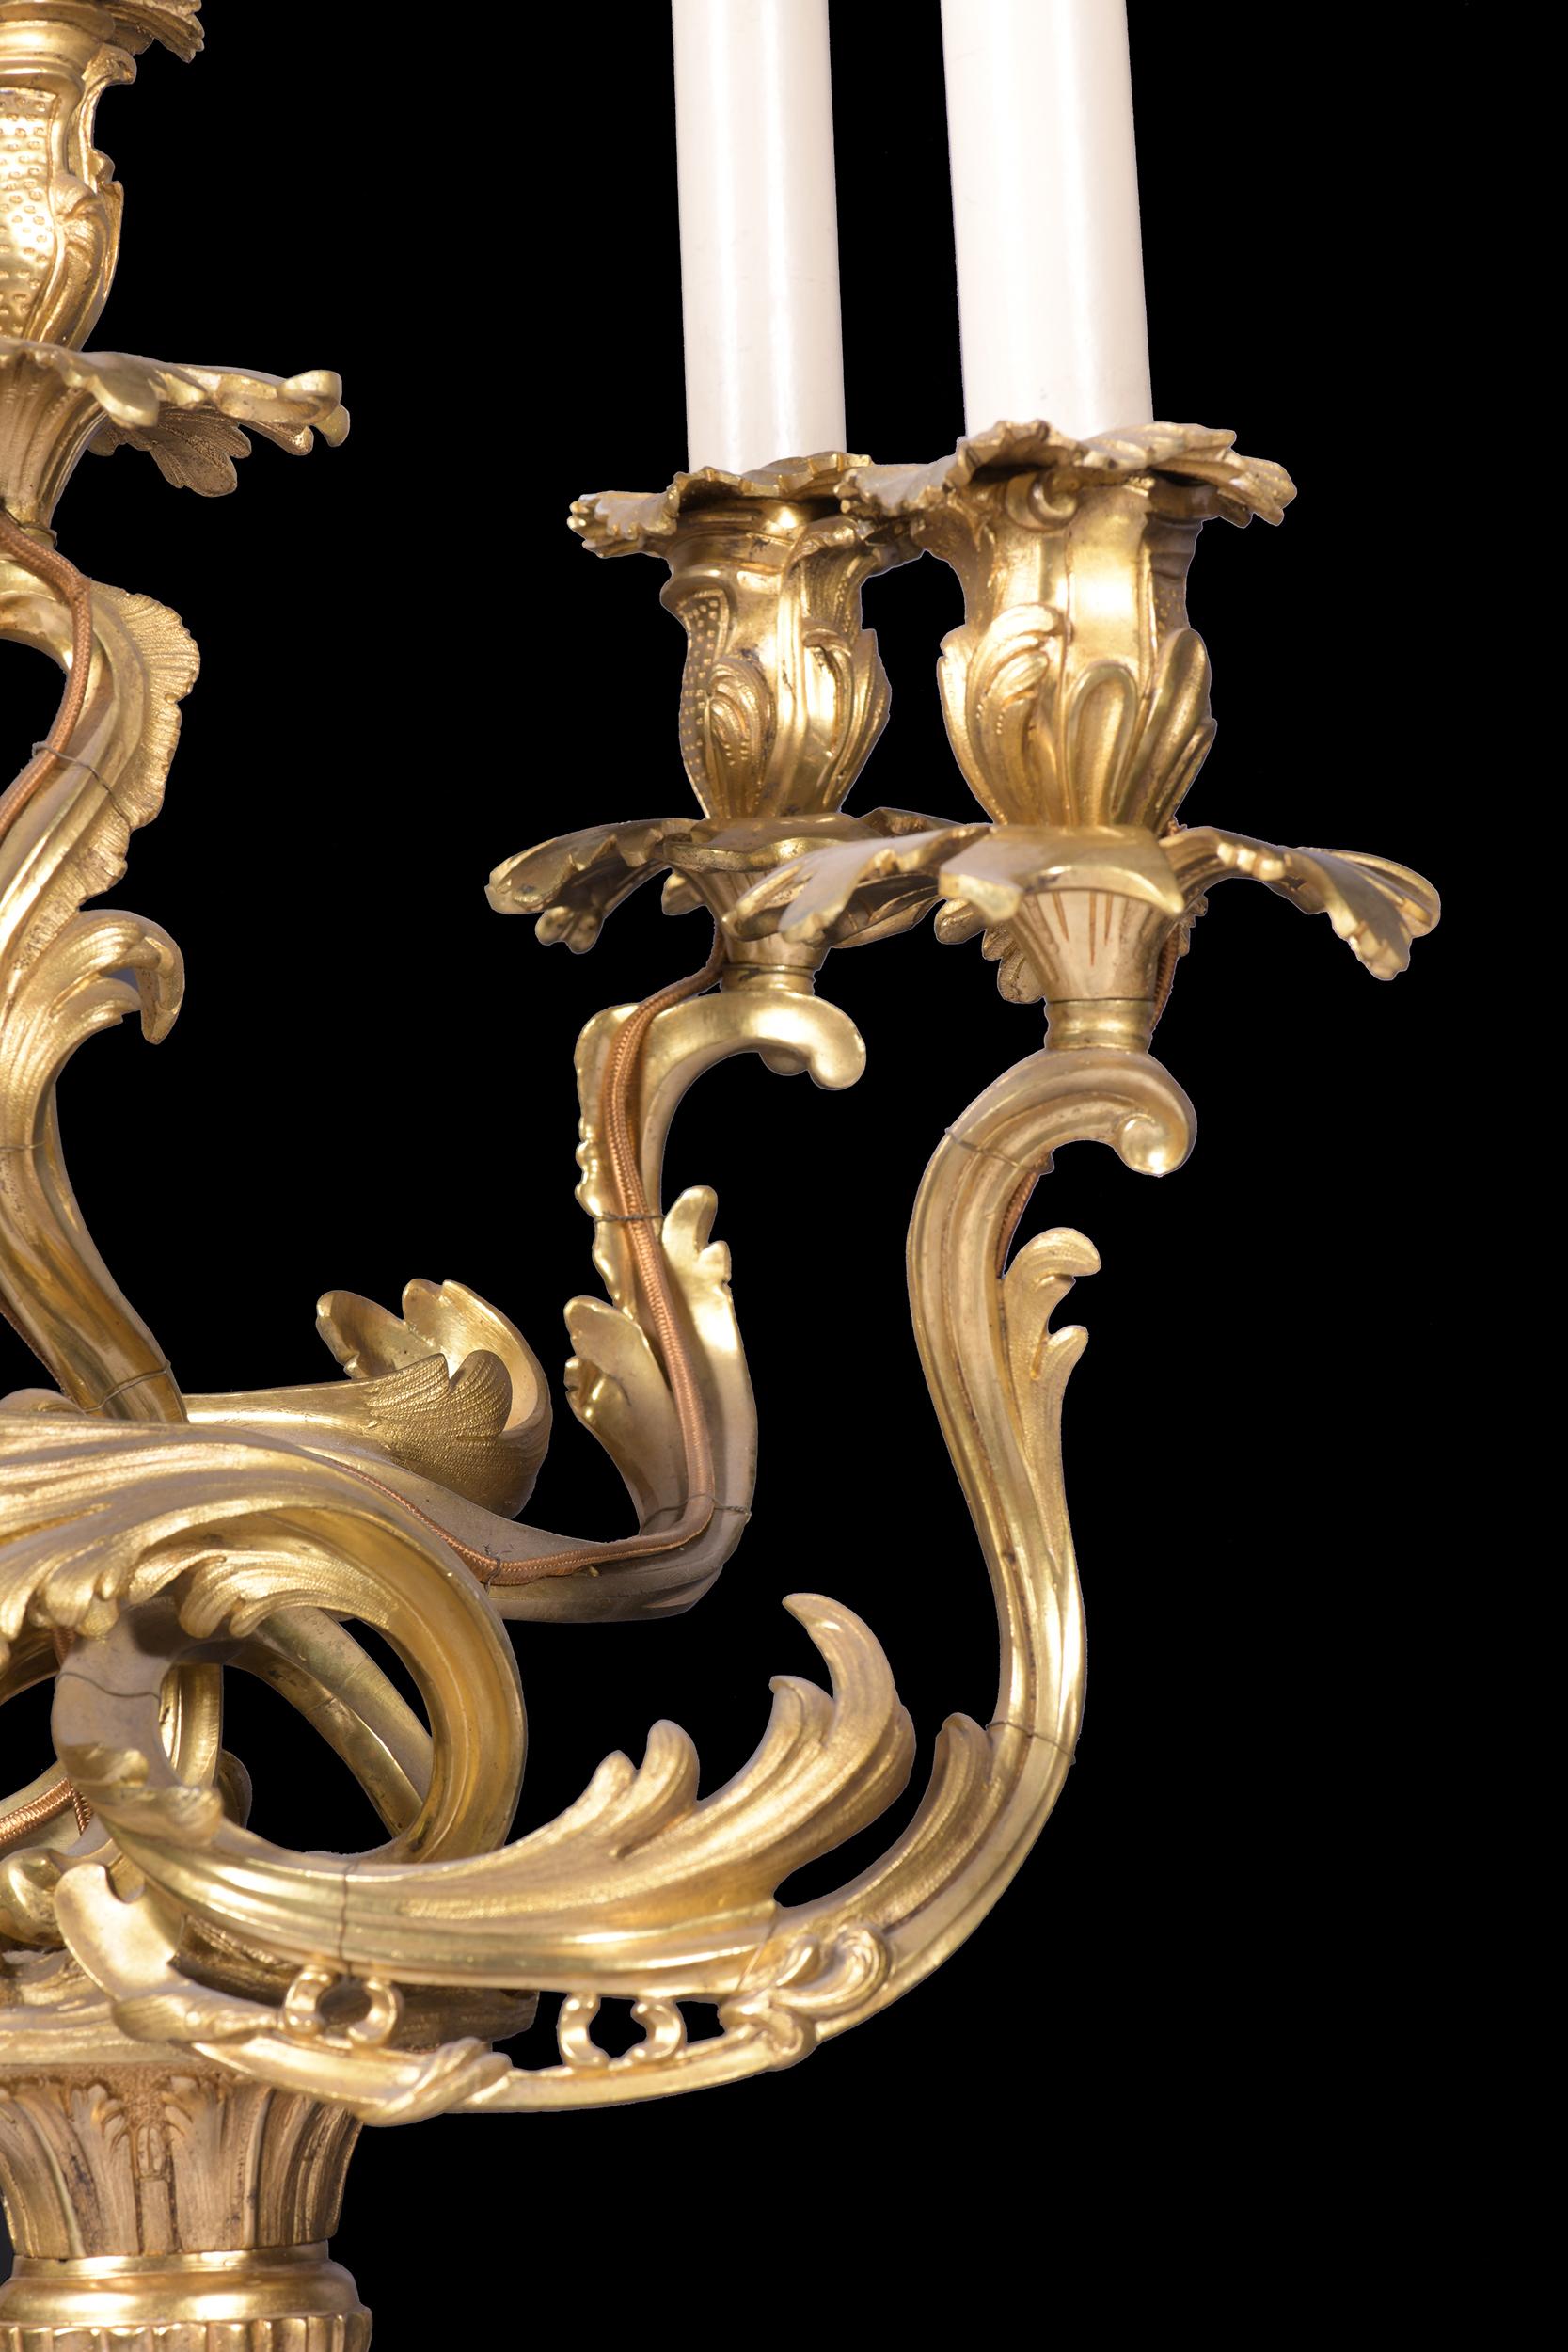 Pair of Late 19th Century French Ormolu Candelabra Lamps in the Louis XV Style 1